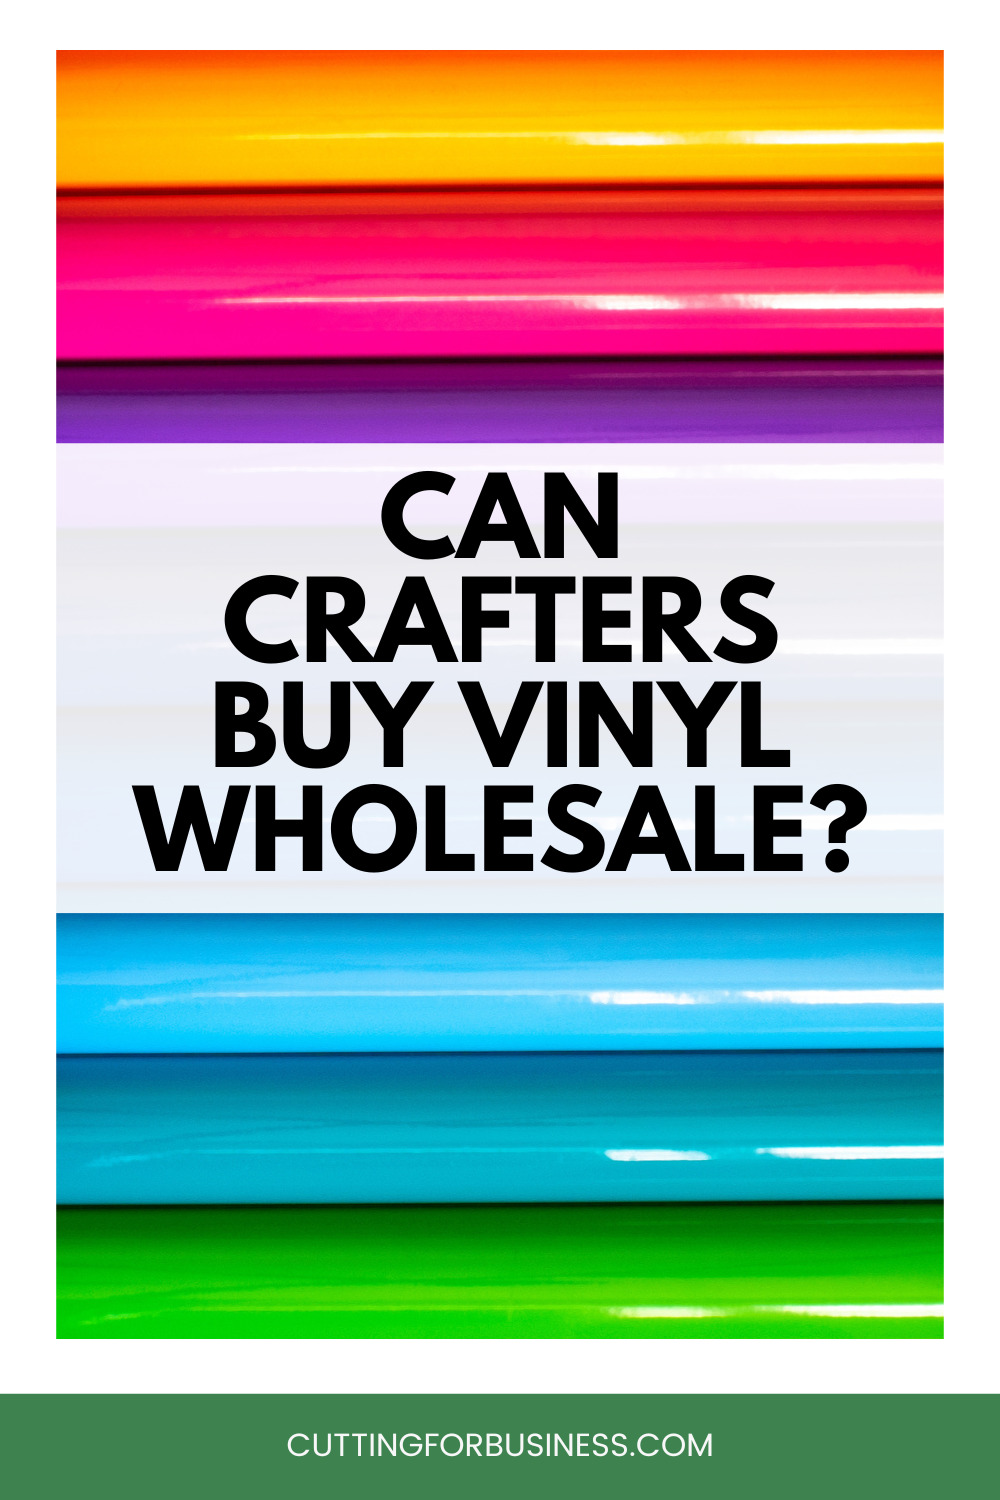 Can Crafters Buy Vinyl Wholesale? - cuttingforbusiness.com